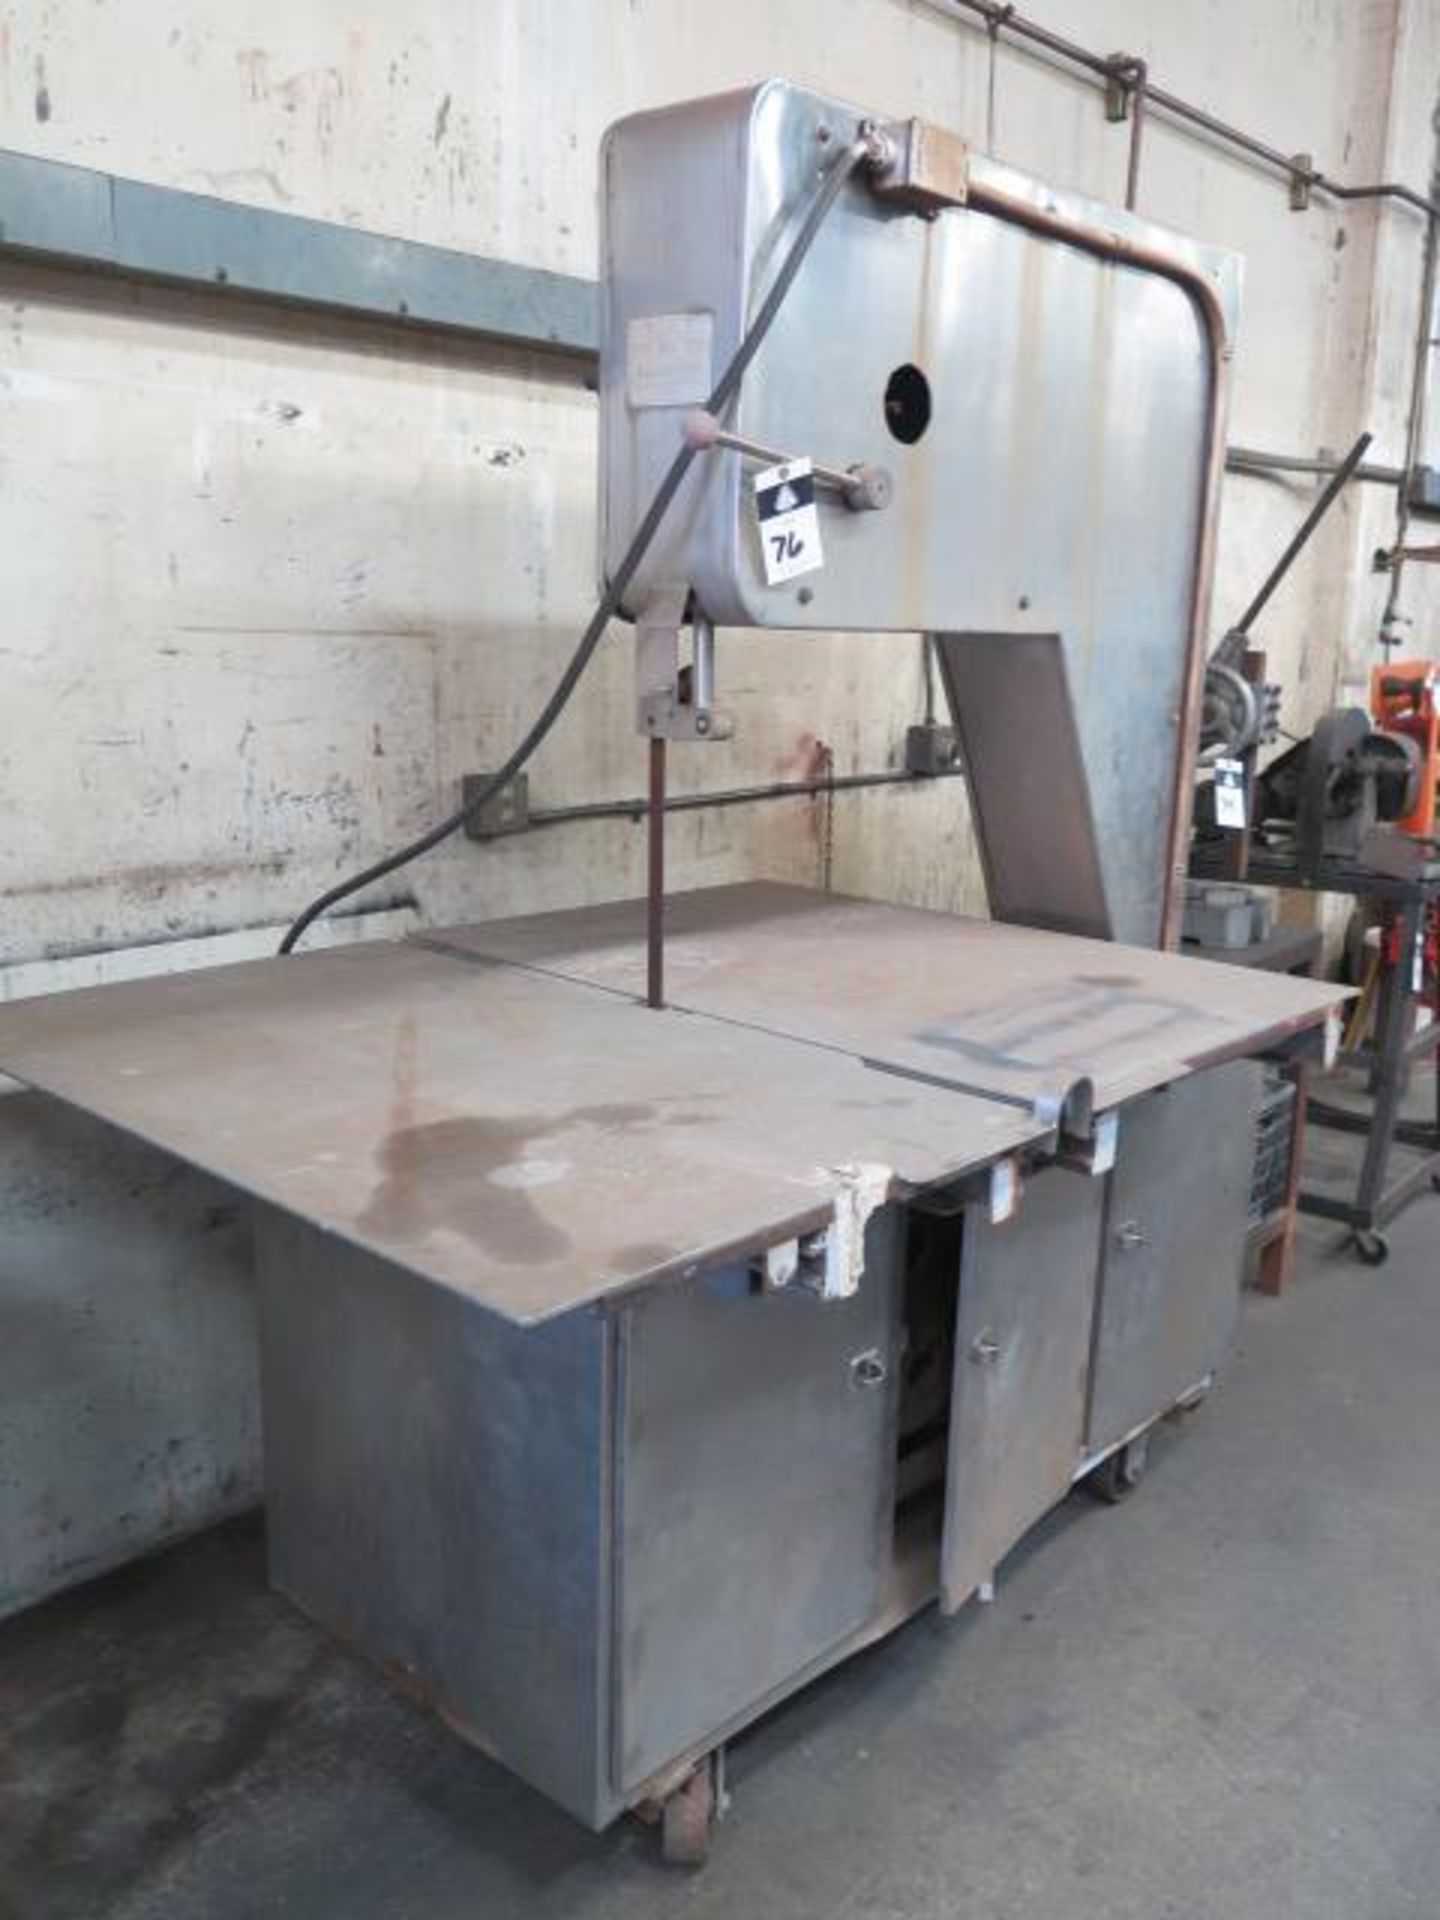 Bernos Mekaniska BS-2 34” Vertical Band Saw s/n 61-L w/ 61” x 45” Table (SOLD AS-IS - NO WARRANTY) - Image 2 of 6